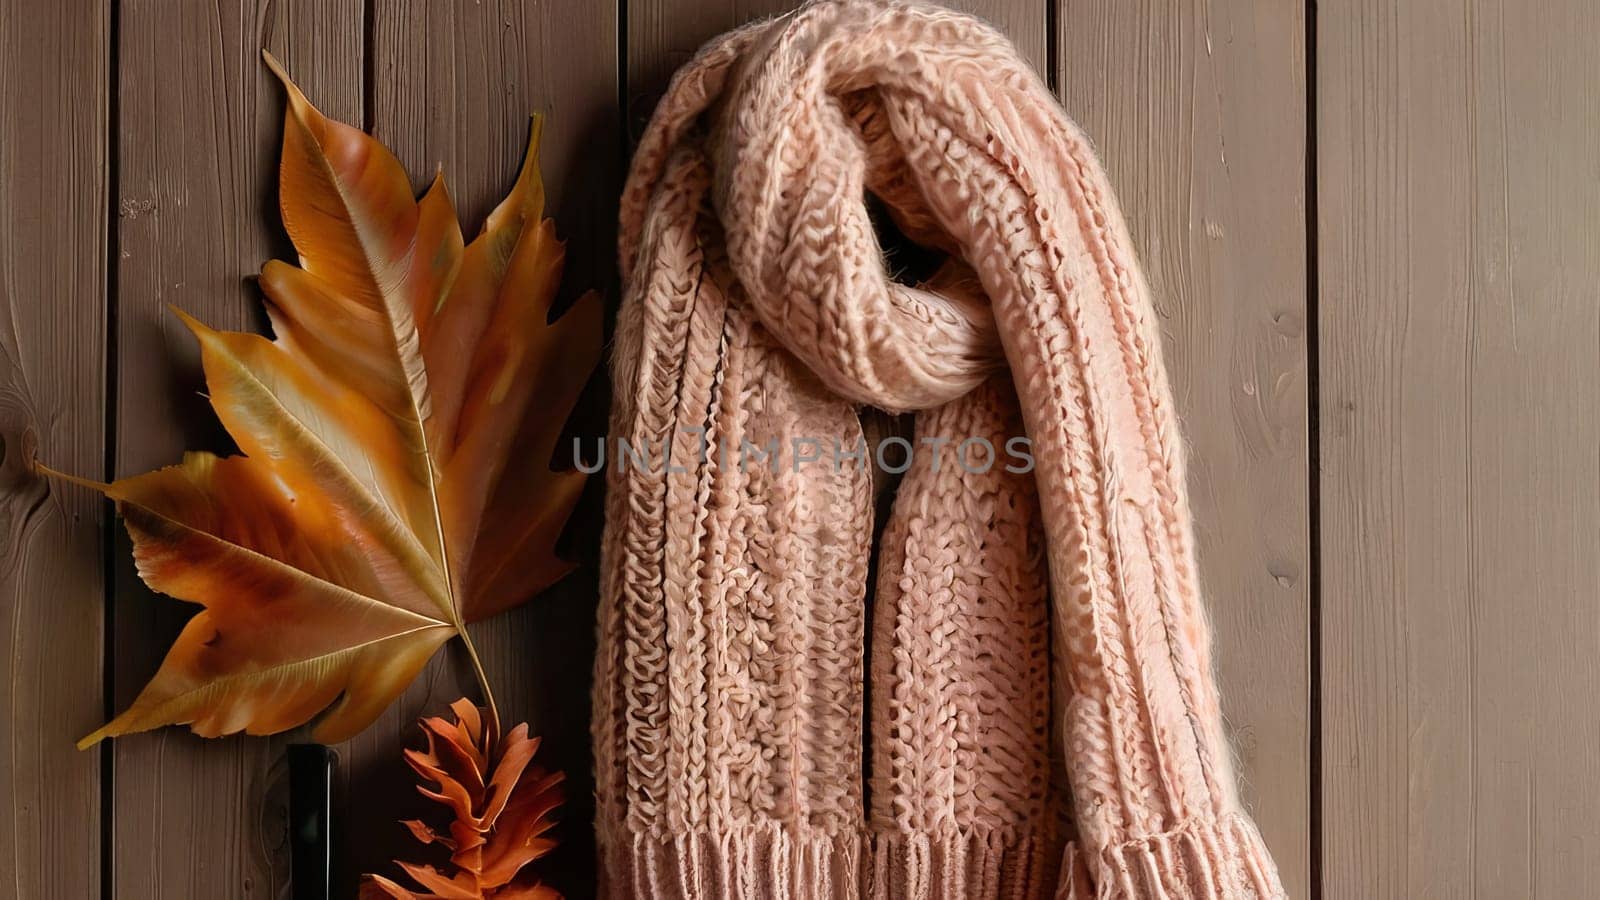 Cozy autumn vibes: knitted scarf, wool hat, and fall leaves on wooden background.